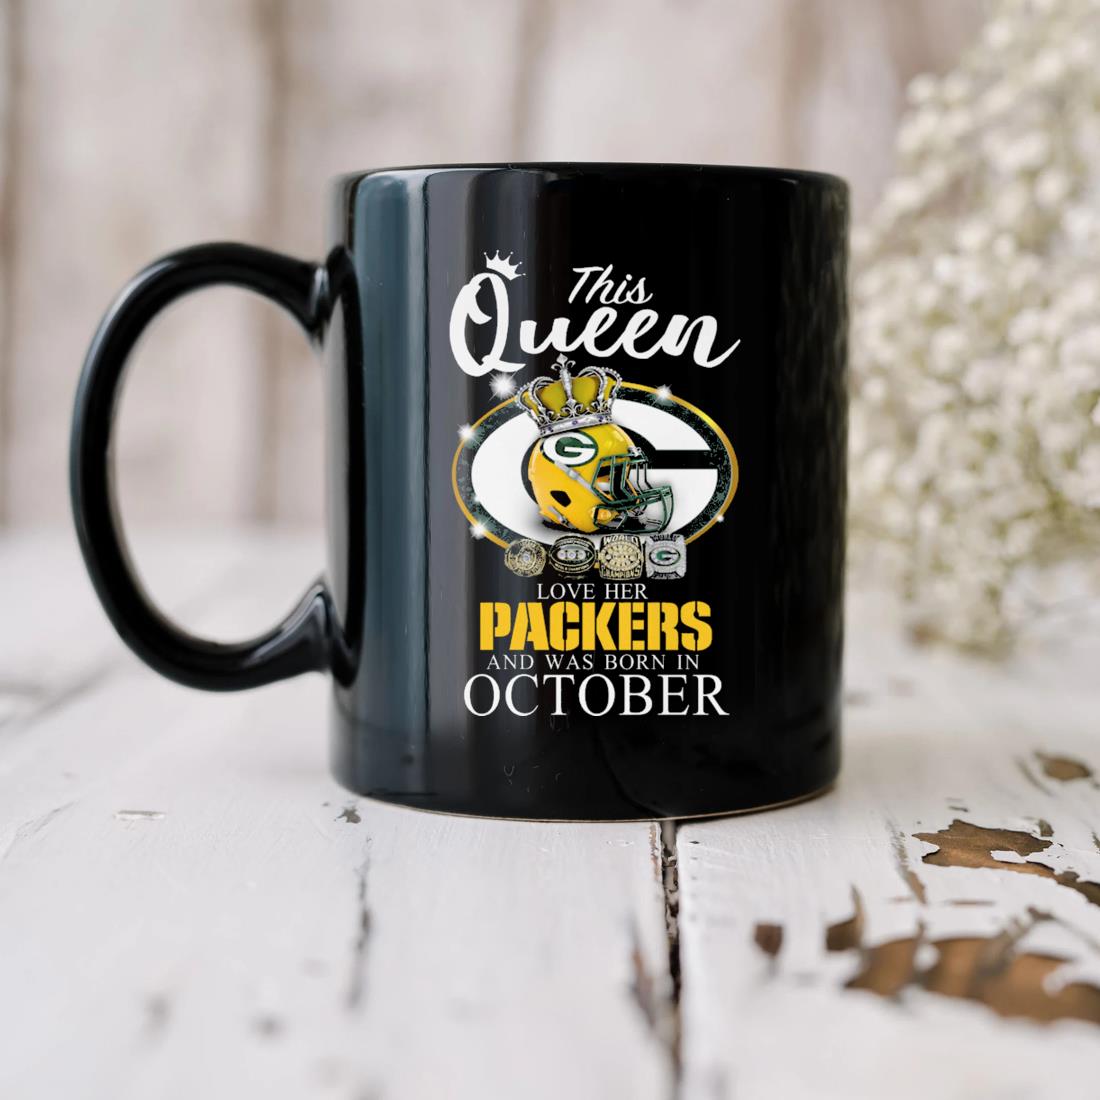 This Queen Love Her Packers And Was Born In October Mug